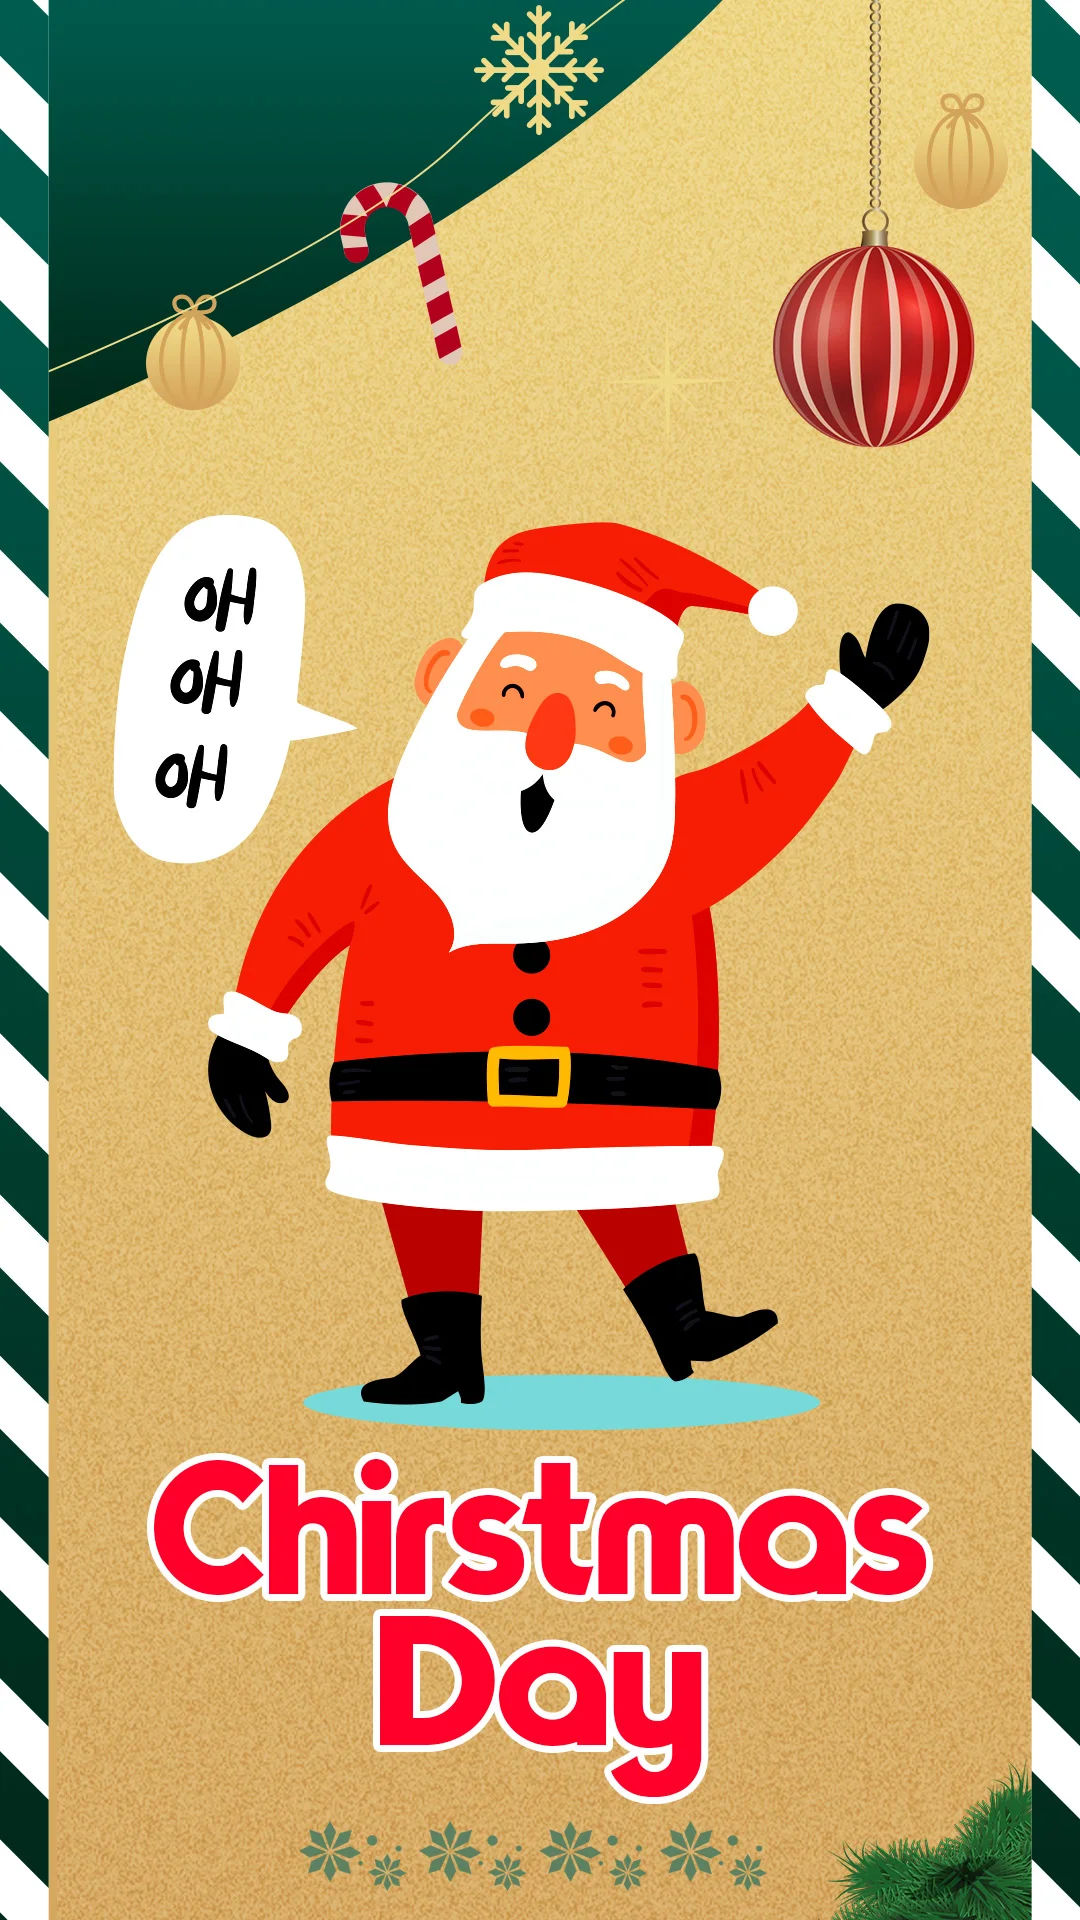 Jolly Christmas Party Poster Featuring Santa Claus – Festive Fun